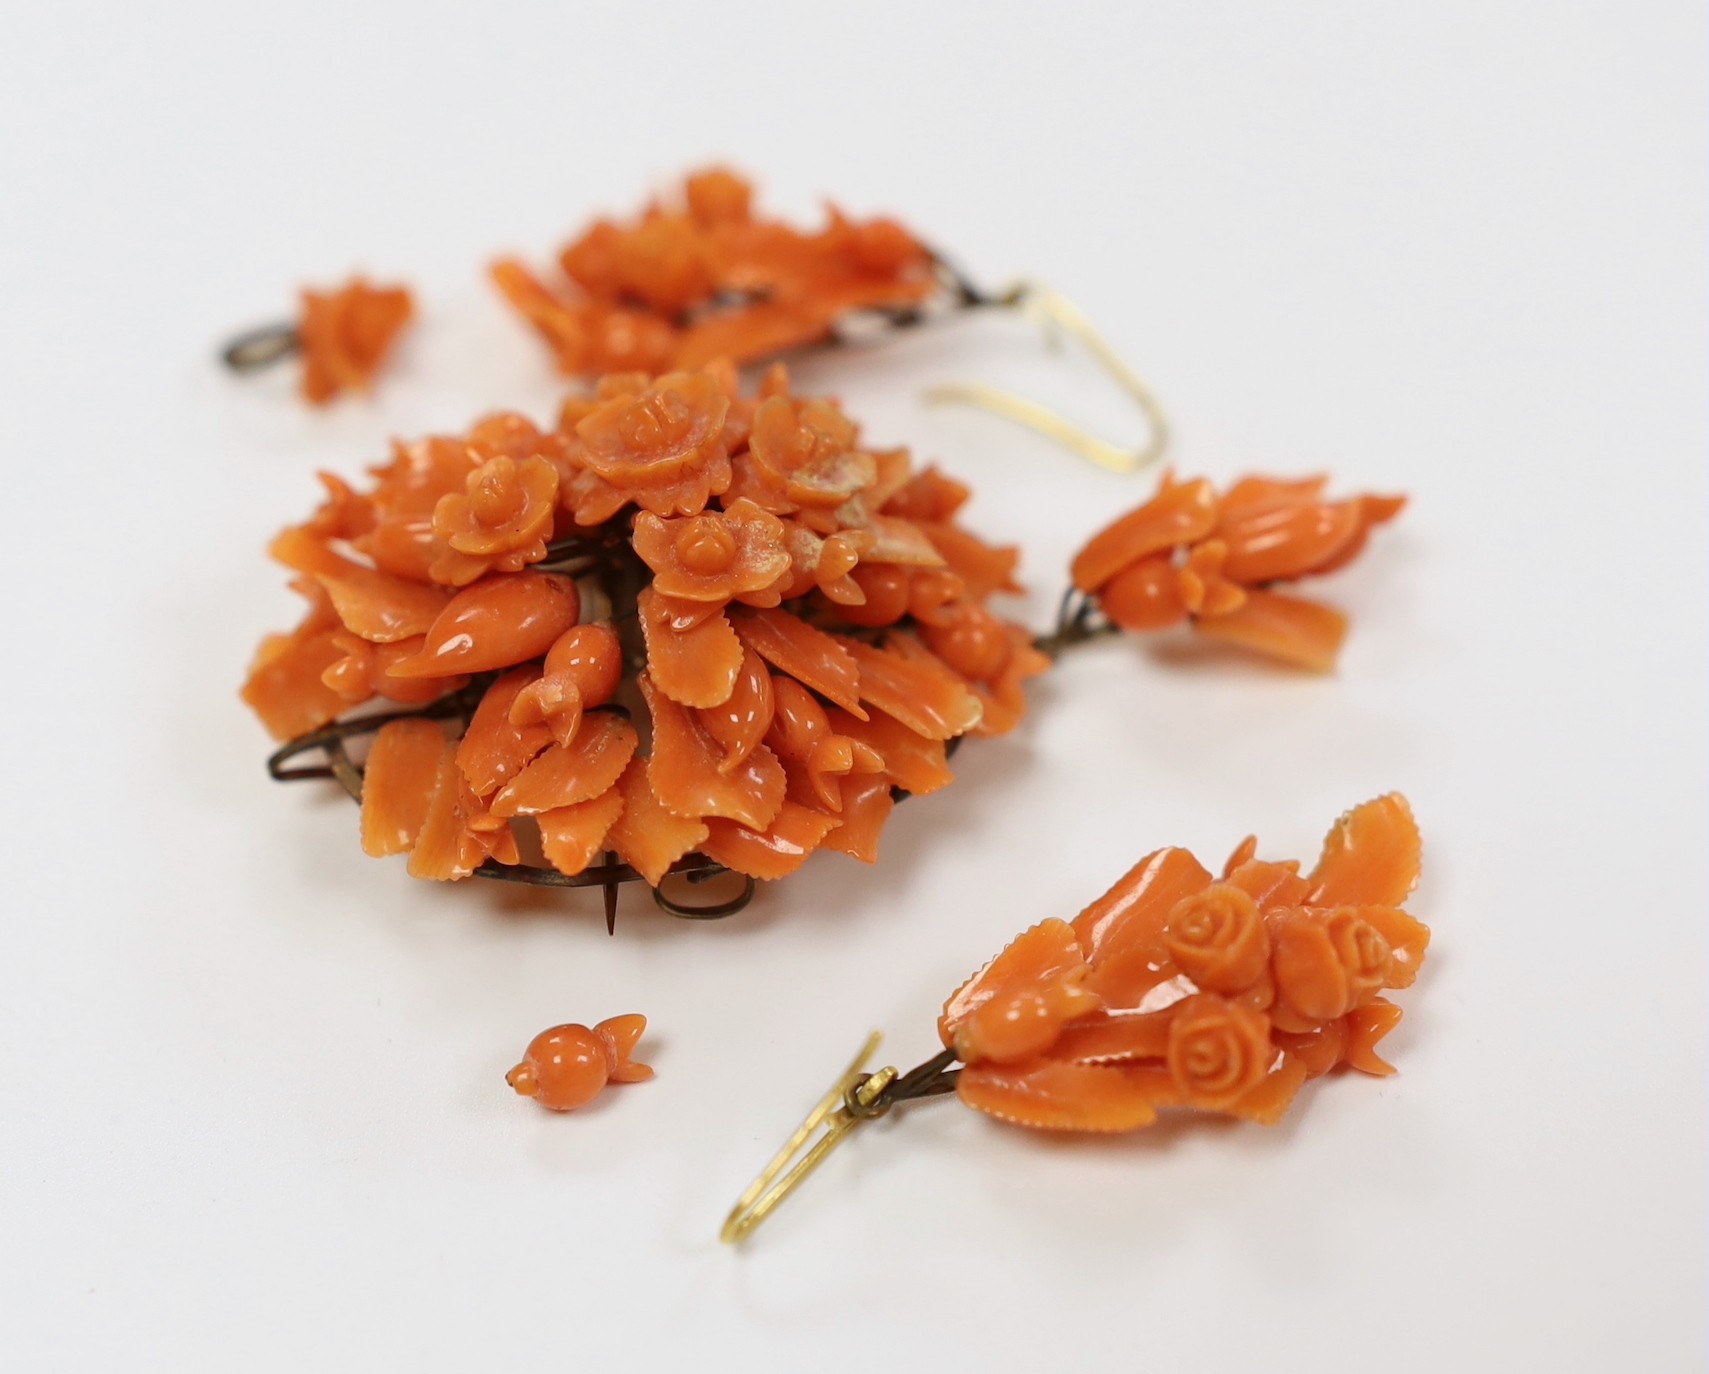 A late 19th/early 20th century gilt metal mounted drop pendant coral brooch carved as a bouquet of flowers, 68mm and a pair of similar earrings(a.f.)